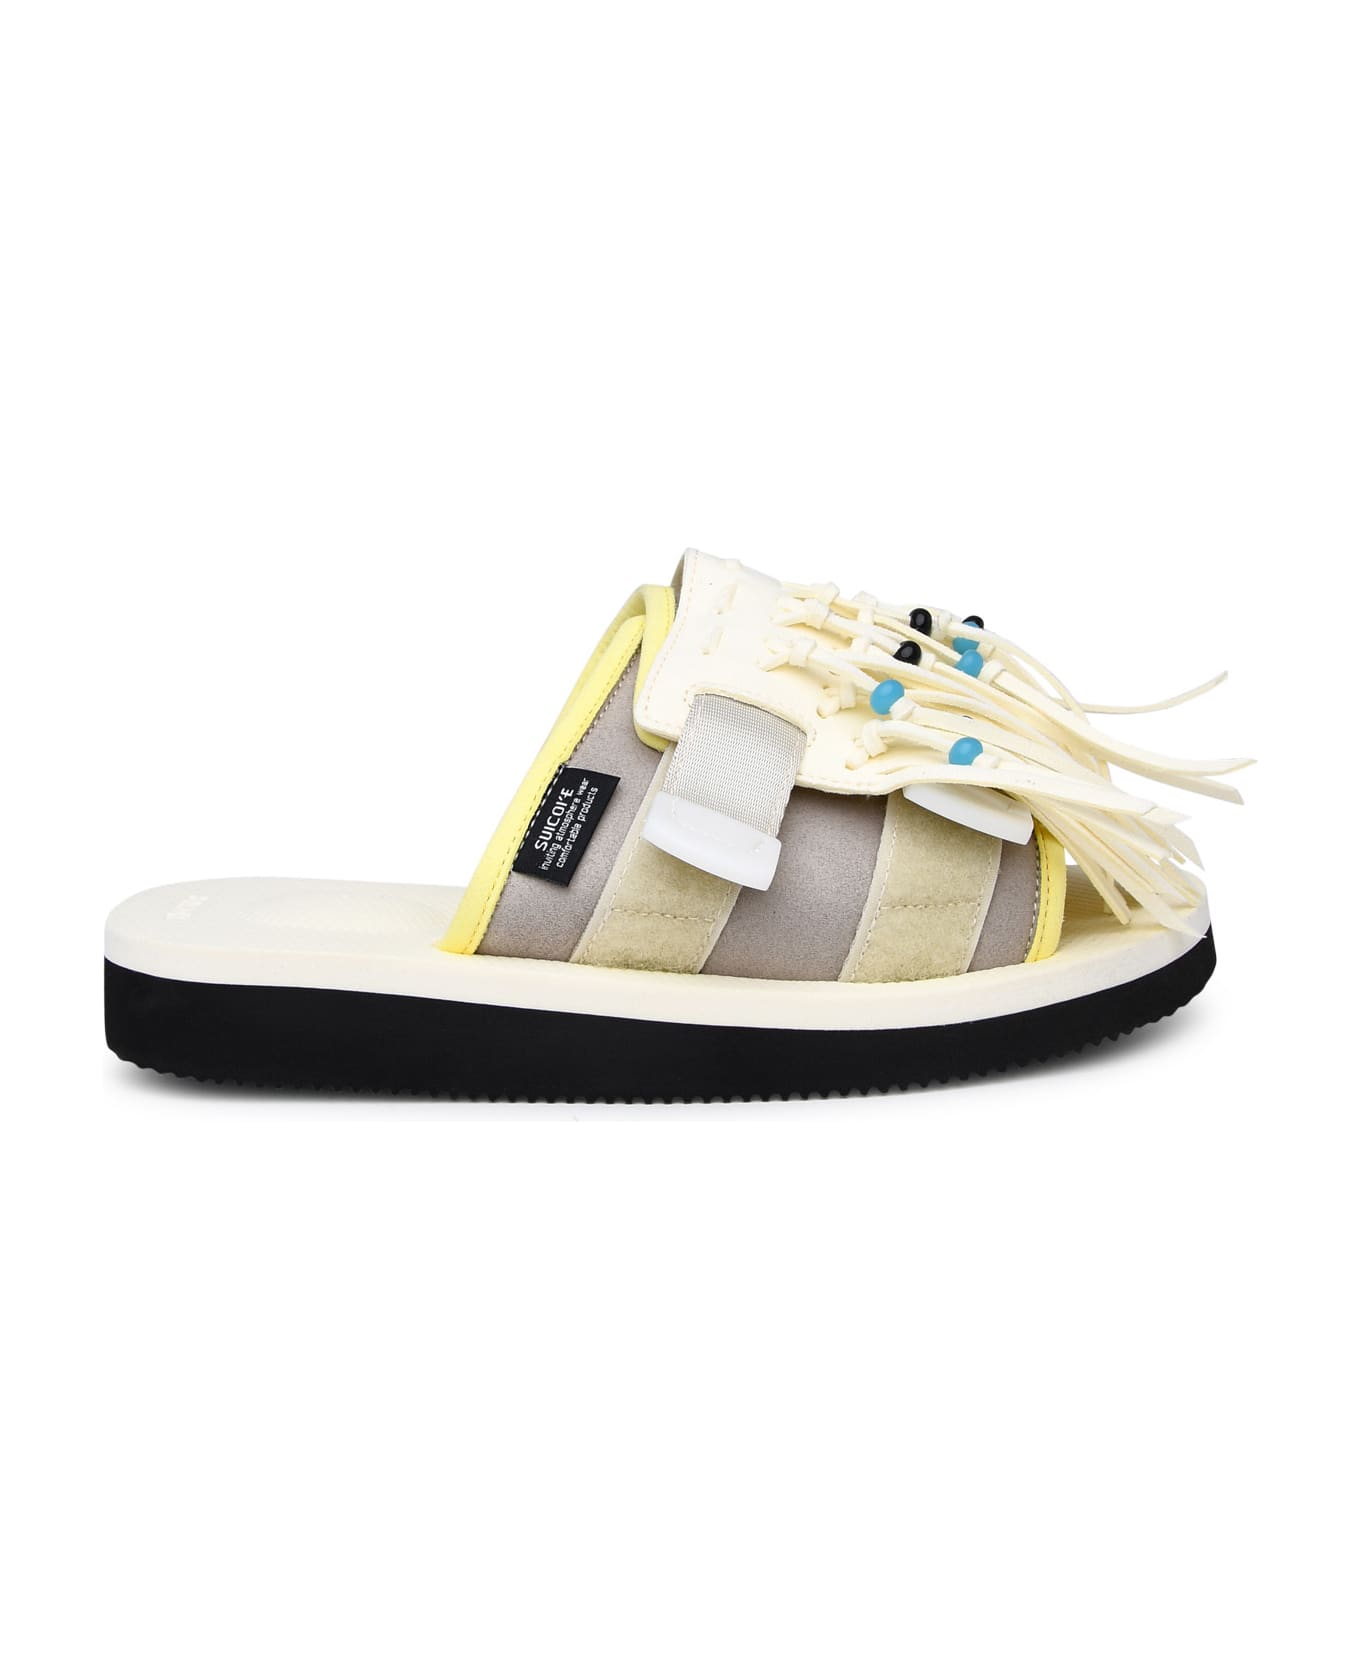 SUICOKE Hoto Cab Slipper In Ivory Synthetic Leather - White サンダル